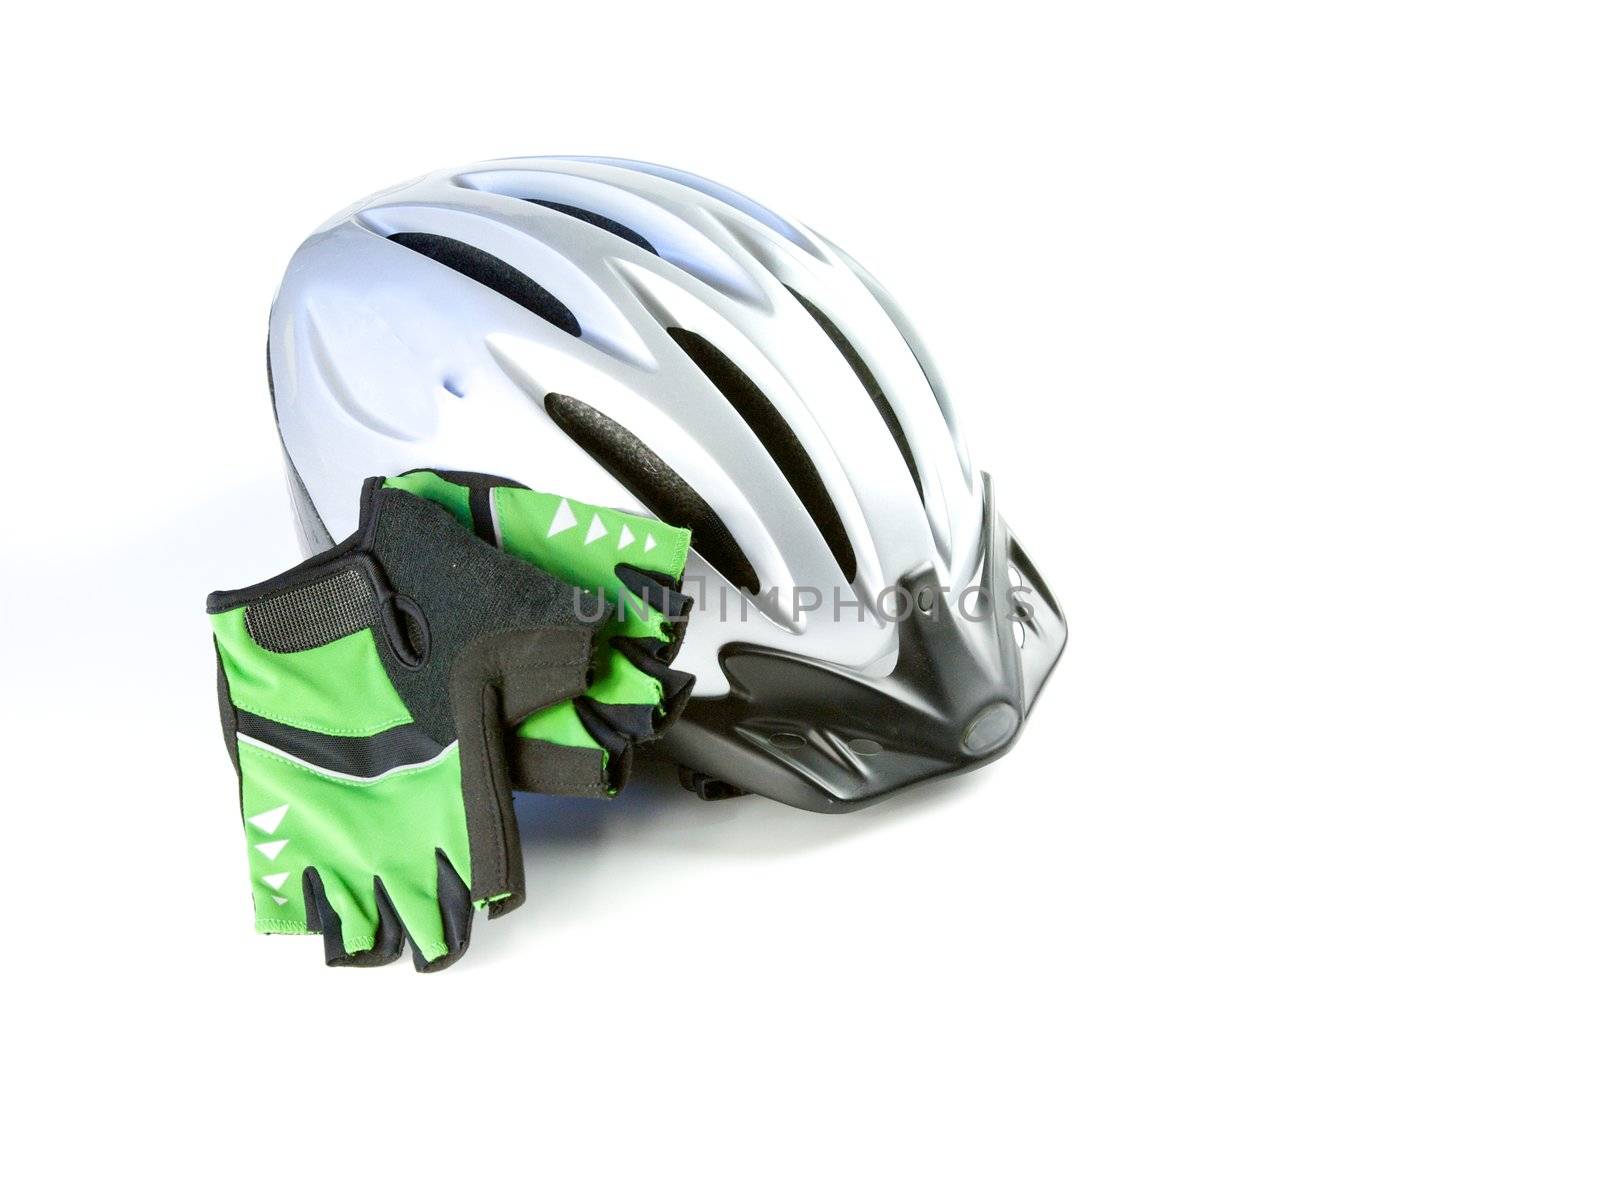 Biking Helmet with riding gloves, isolated